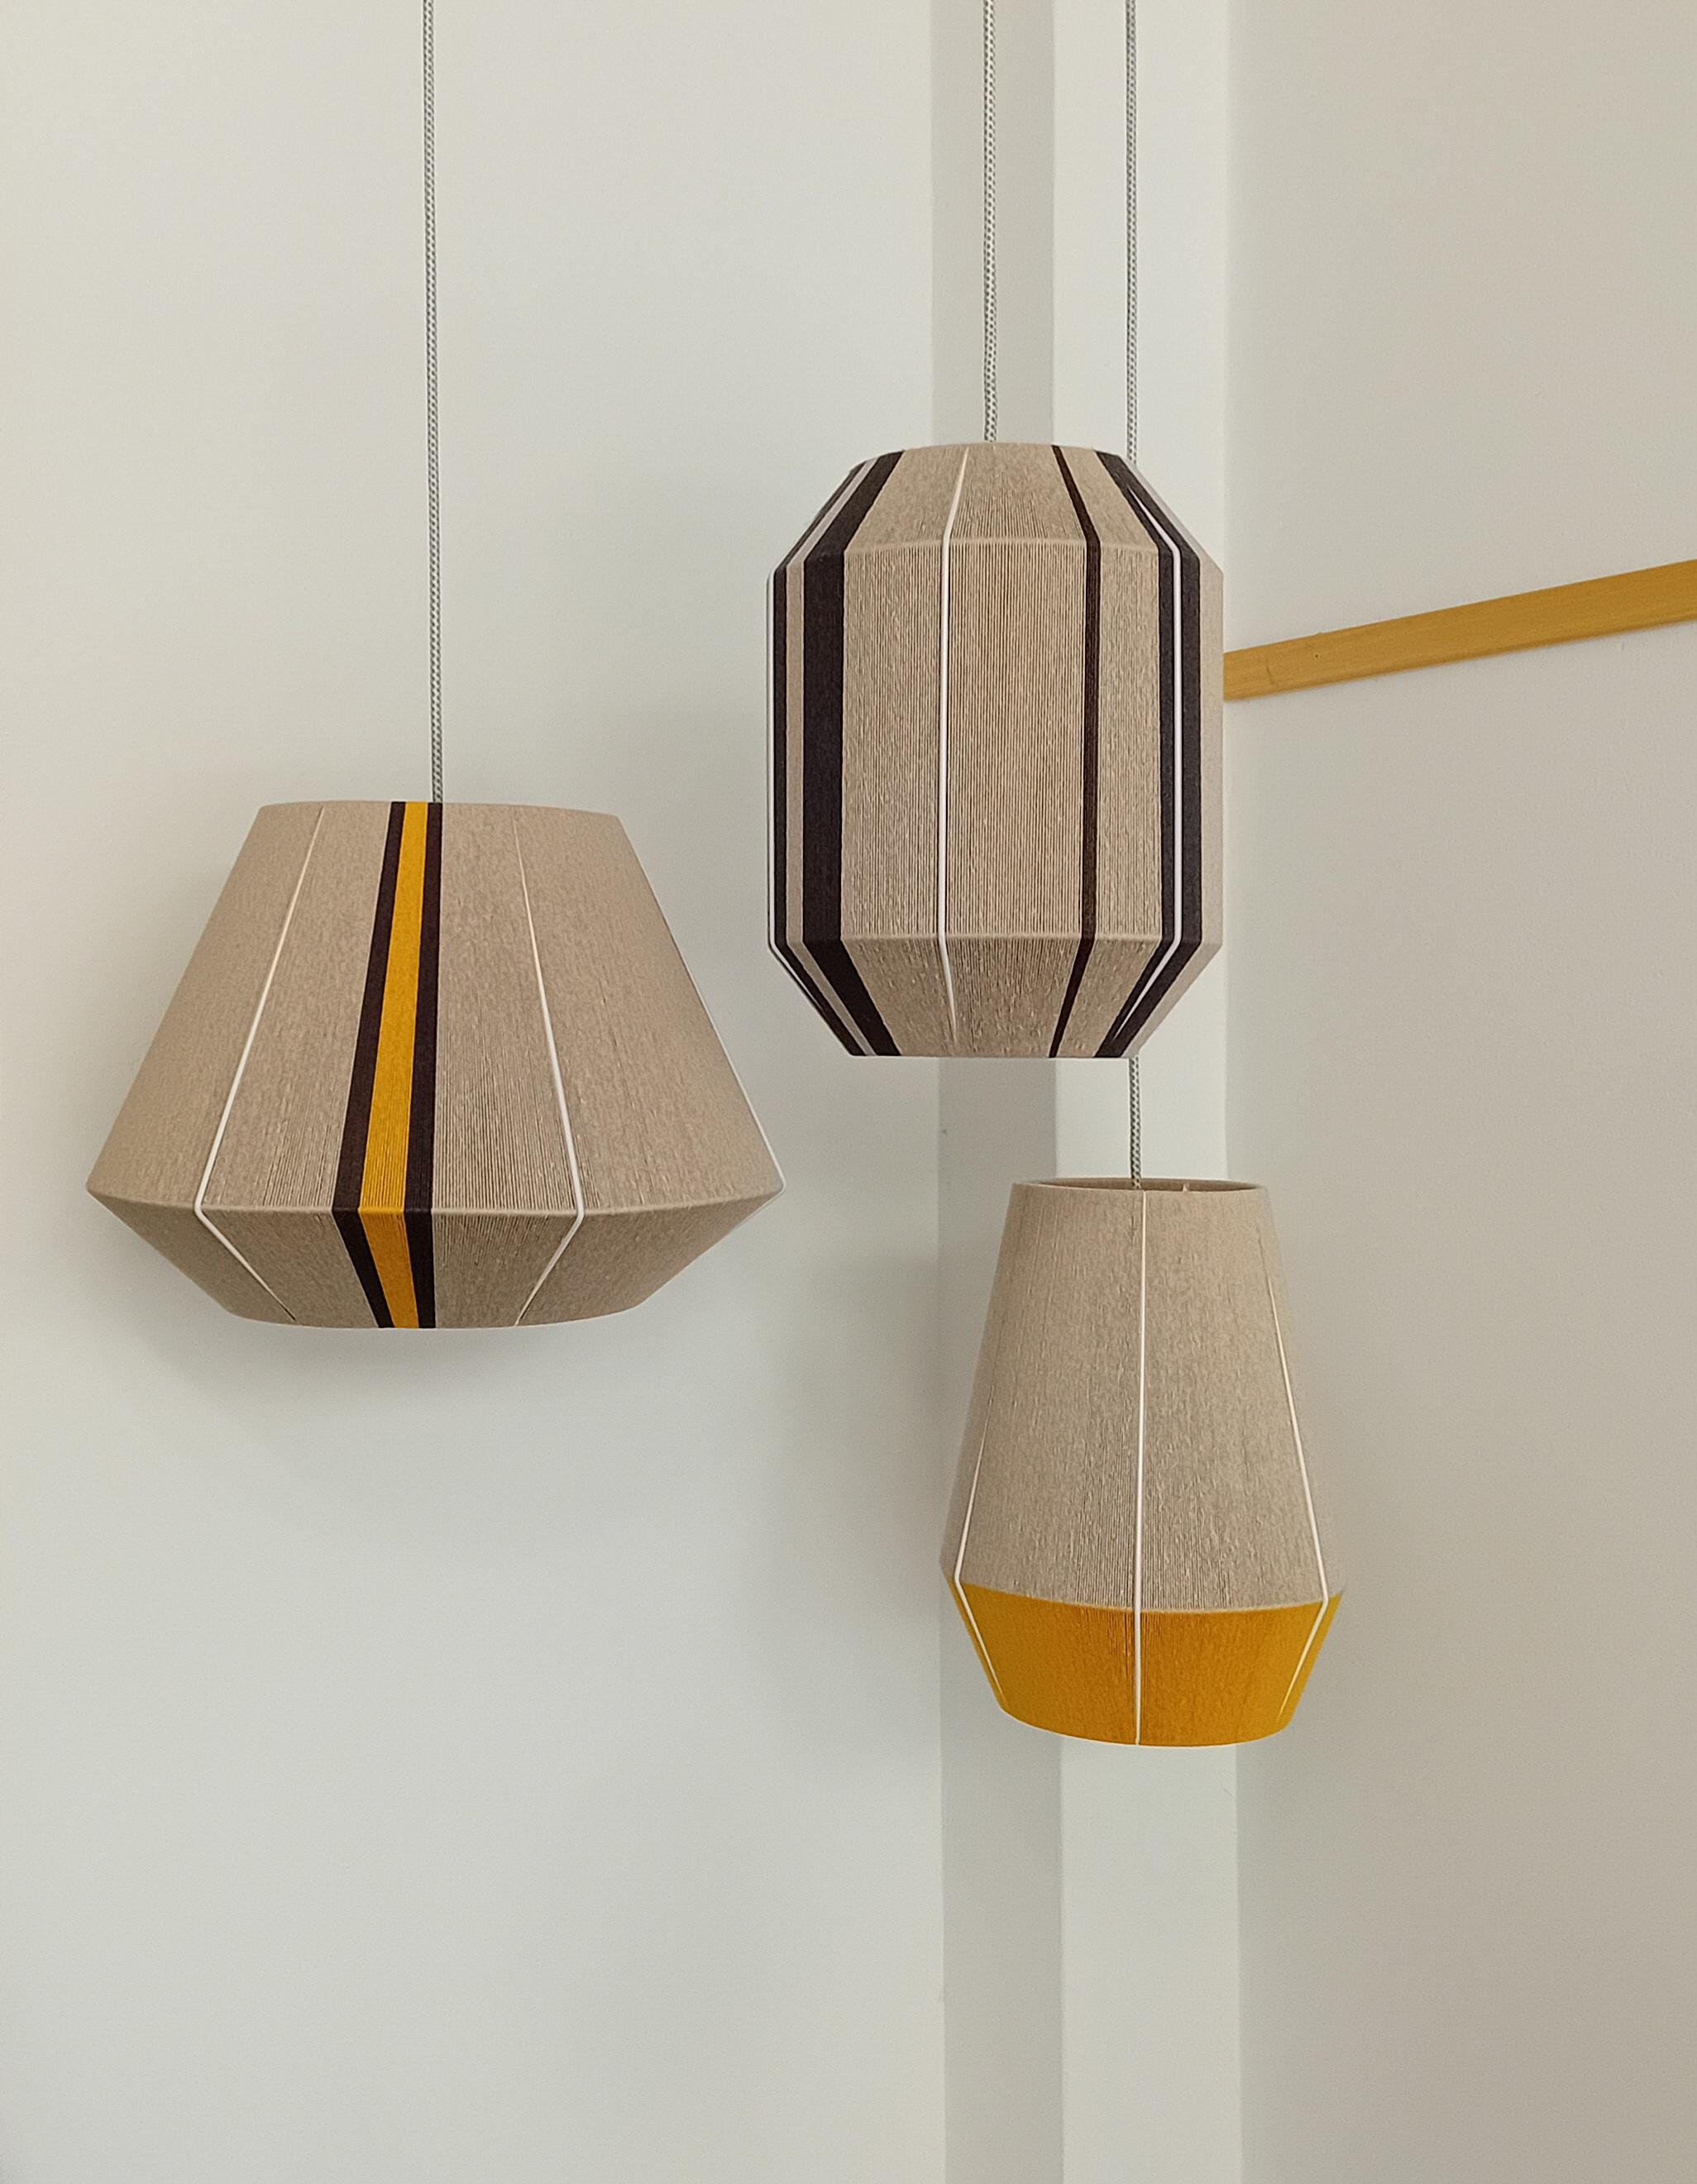 Custom lampshades: Serie1 Special, Serie2 Small, Serie1 Small